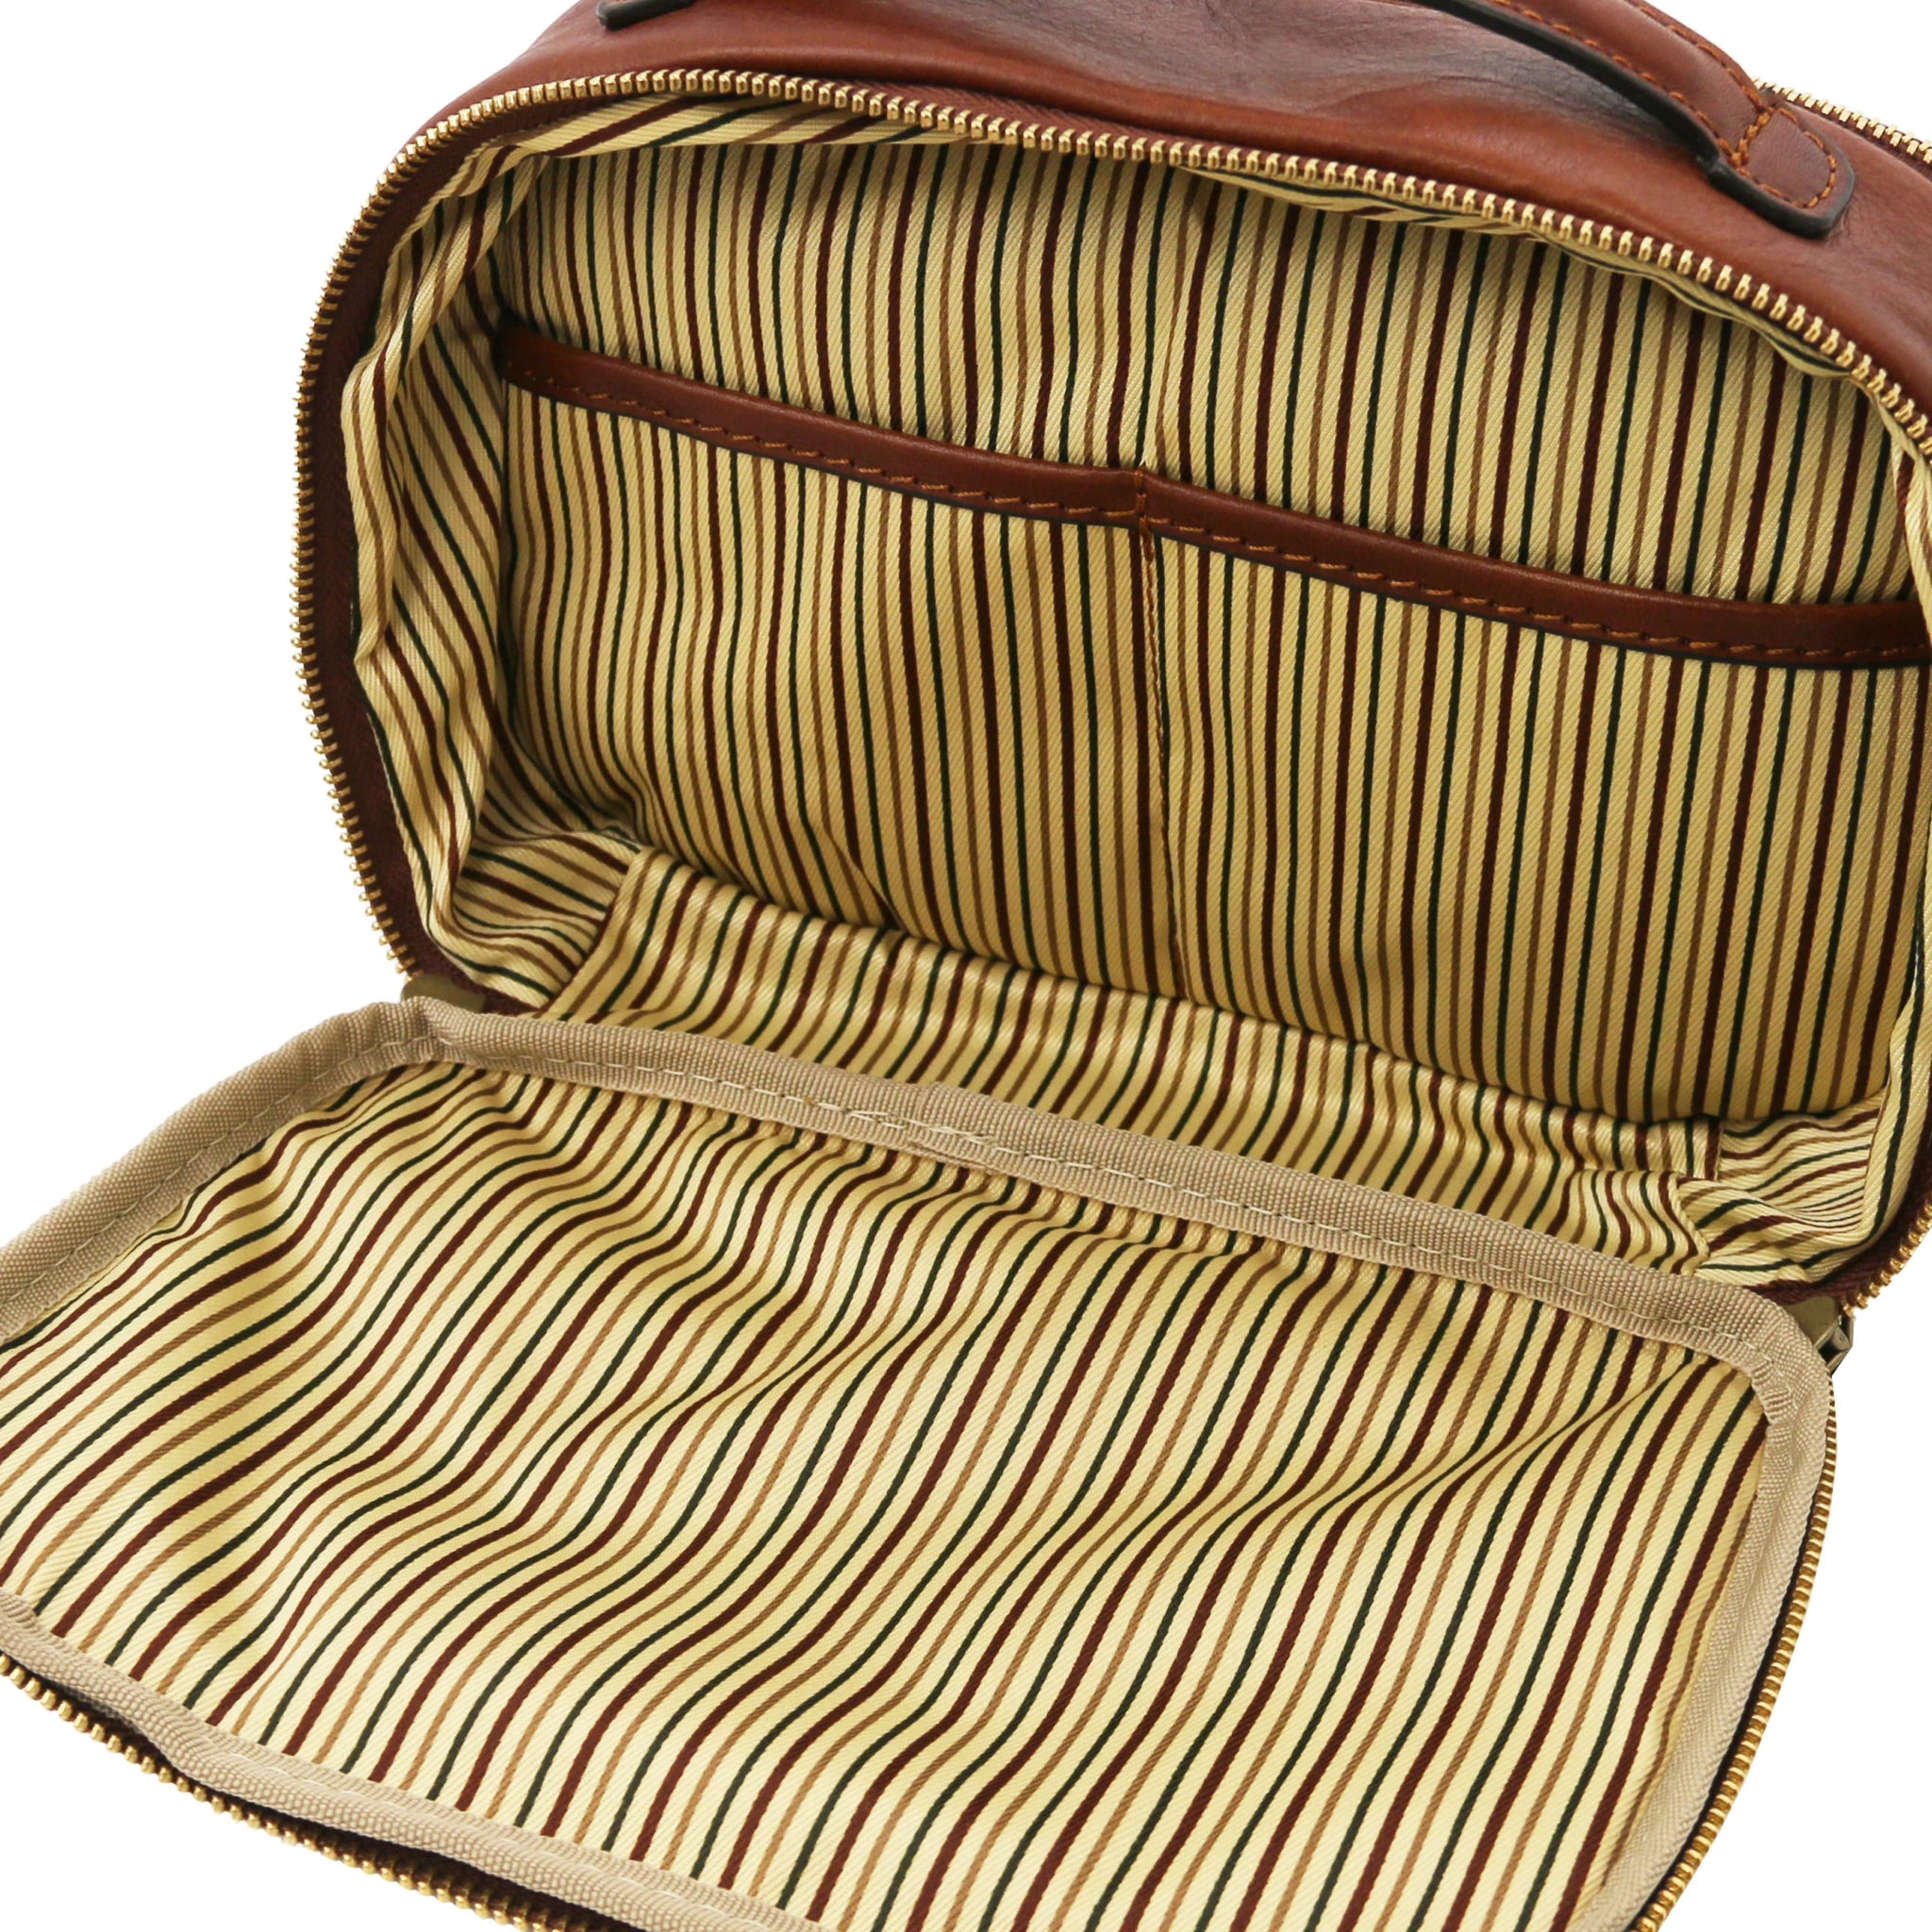 Marvin Italian Leather Toiletry Bag - L'Atelier Global